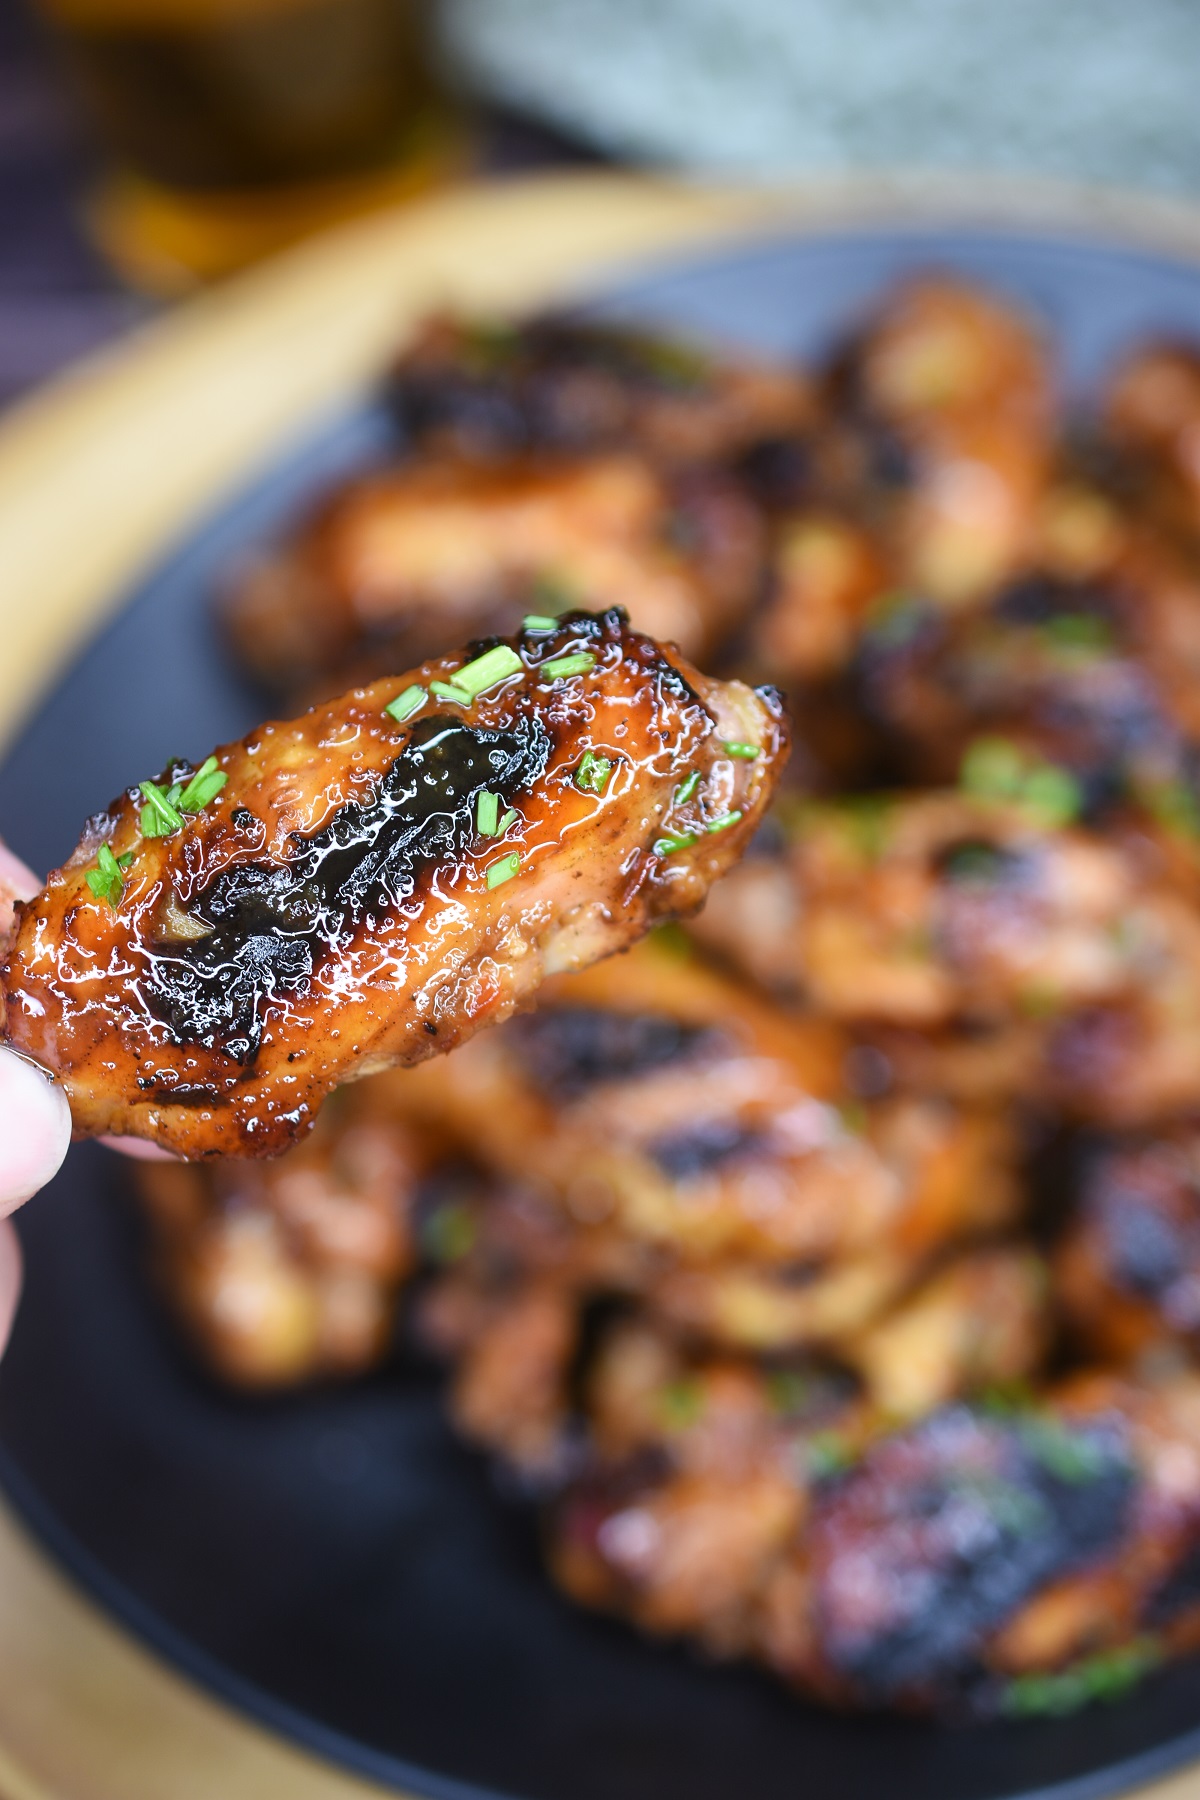 Asian Chicken Wings recipe
Grilled Chicken Wings 